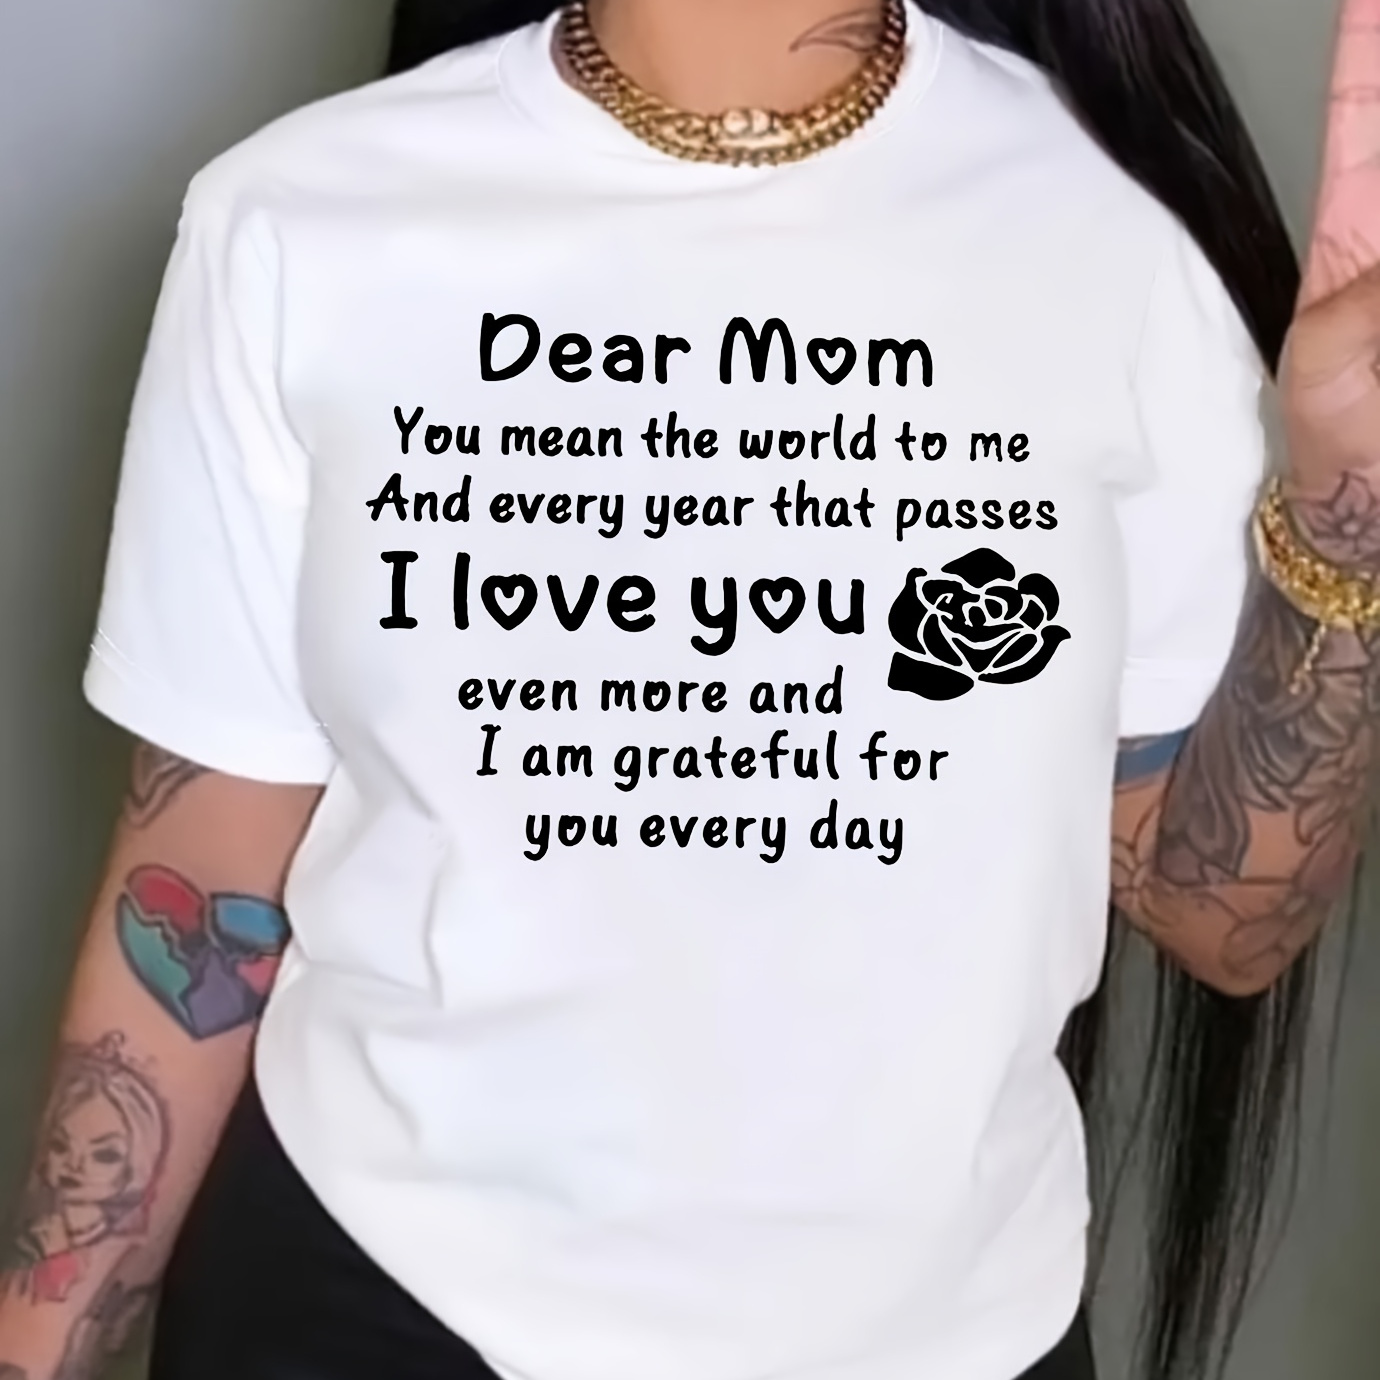 

Mother's Day Mom Print T-shirt, Short Sleeve Crew Neck Casual Top For Summer & Spring, Women's Clothing